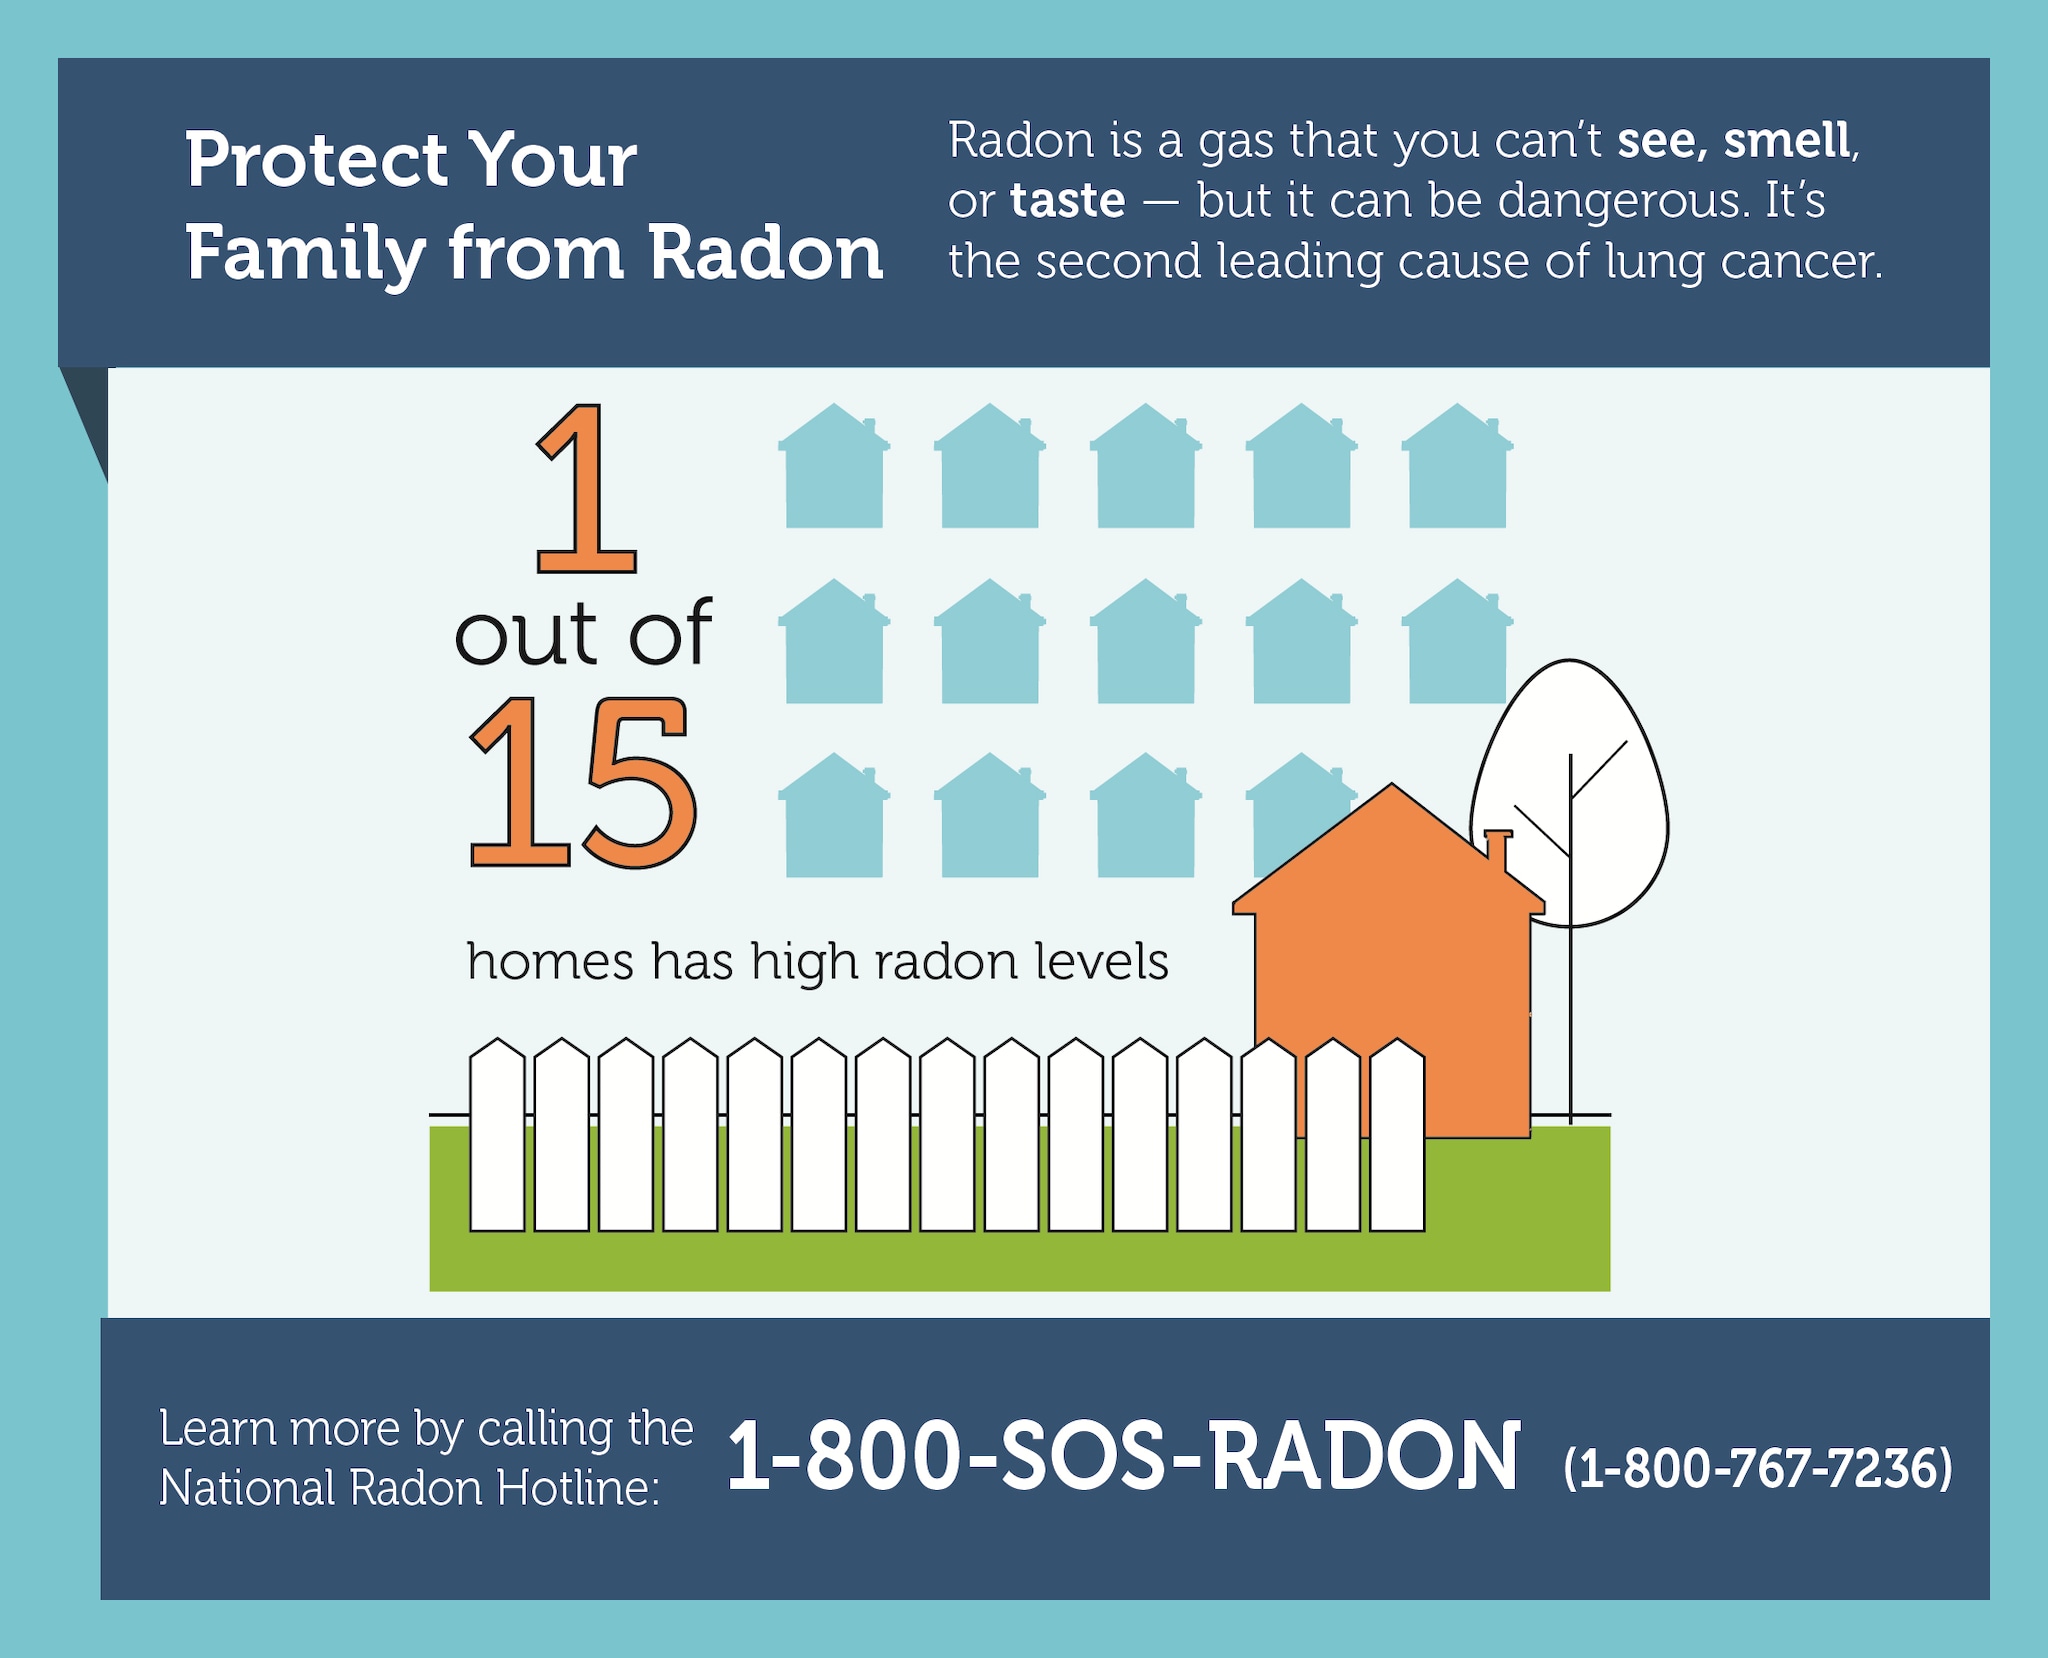 Radon is a gas that you can't see, smell, or taste - but it can be dangerous.